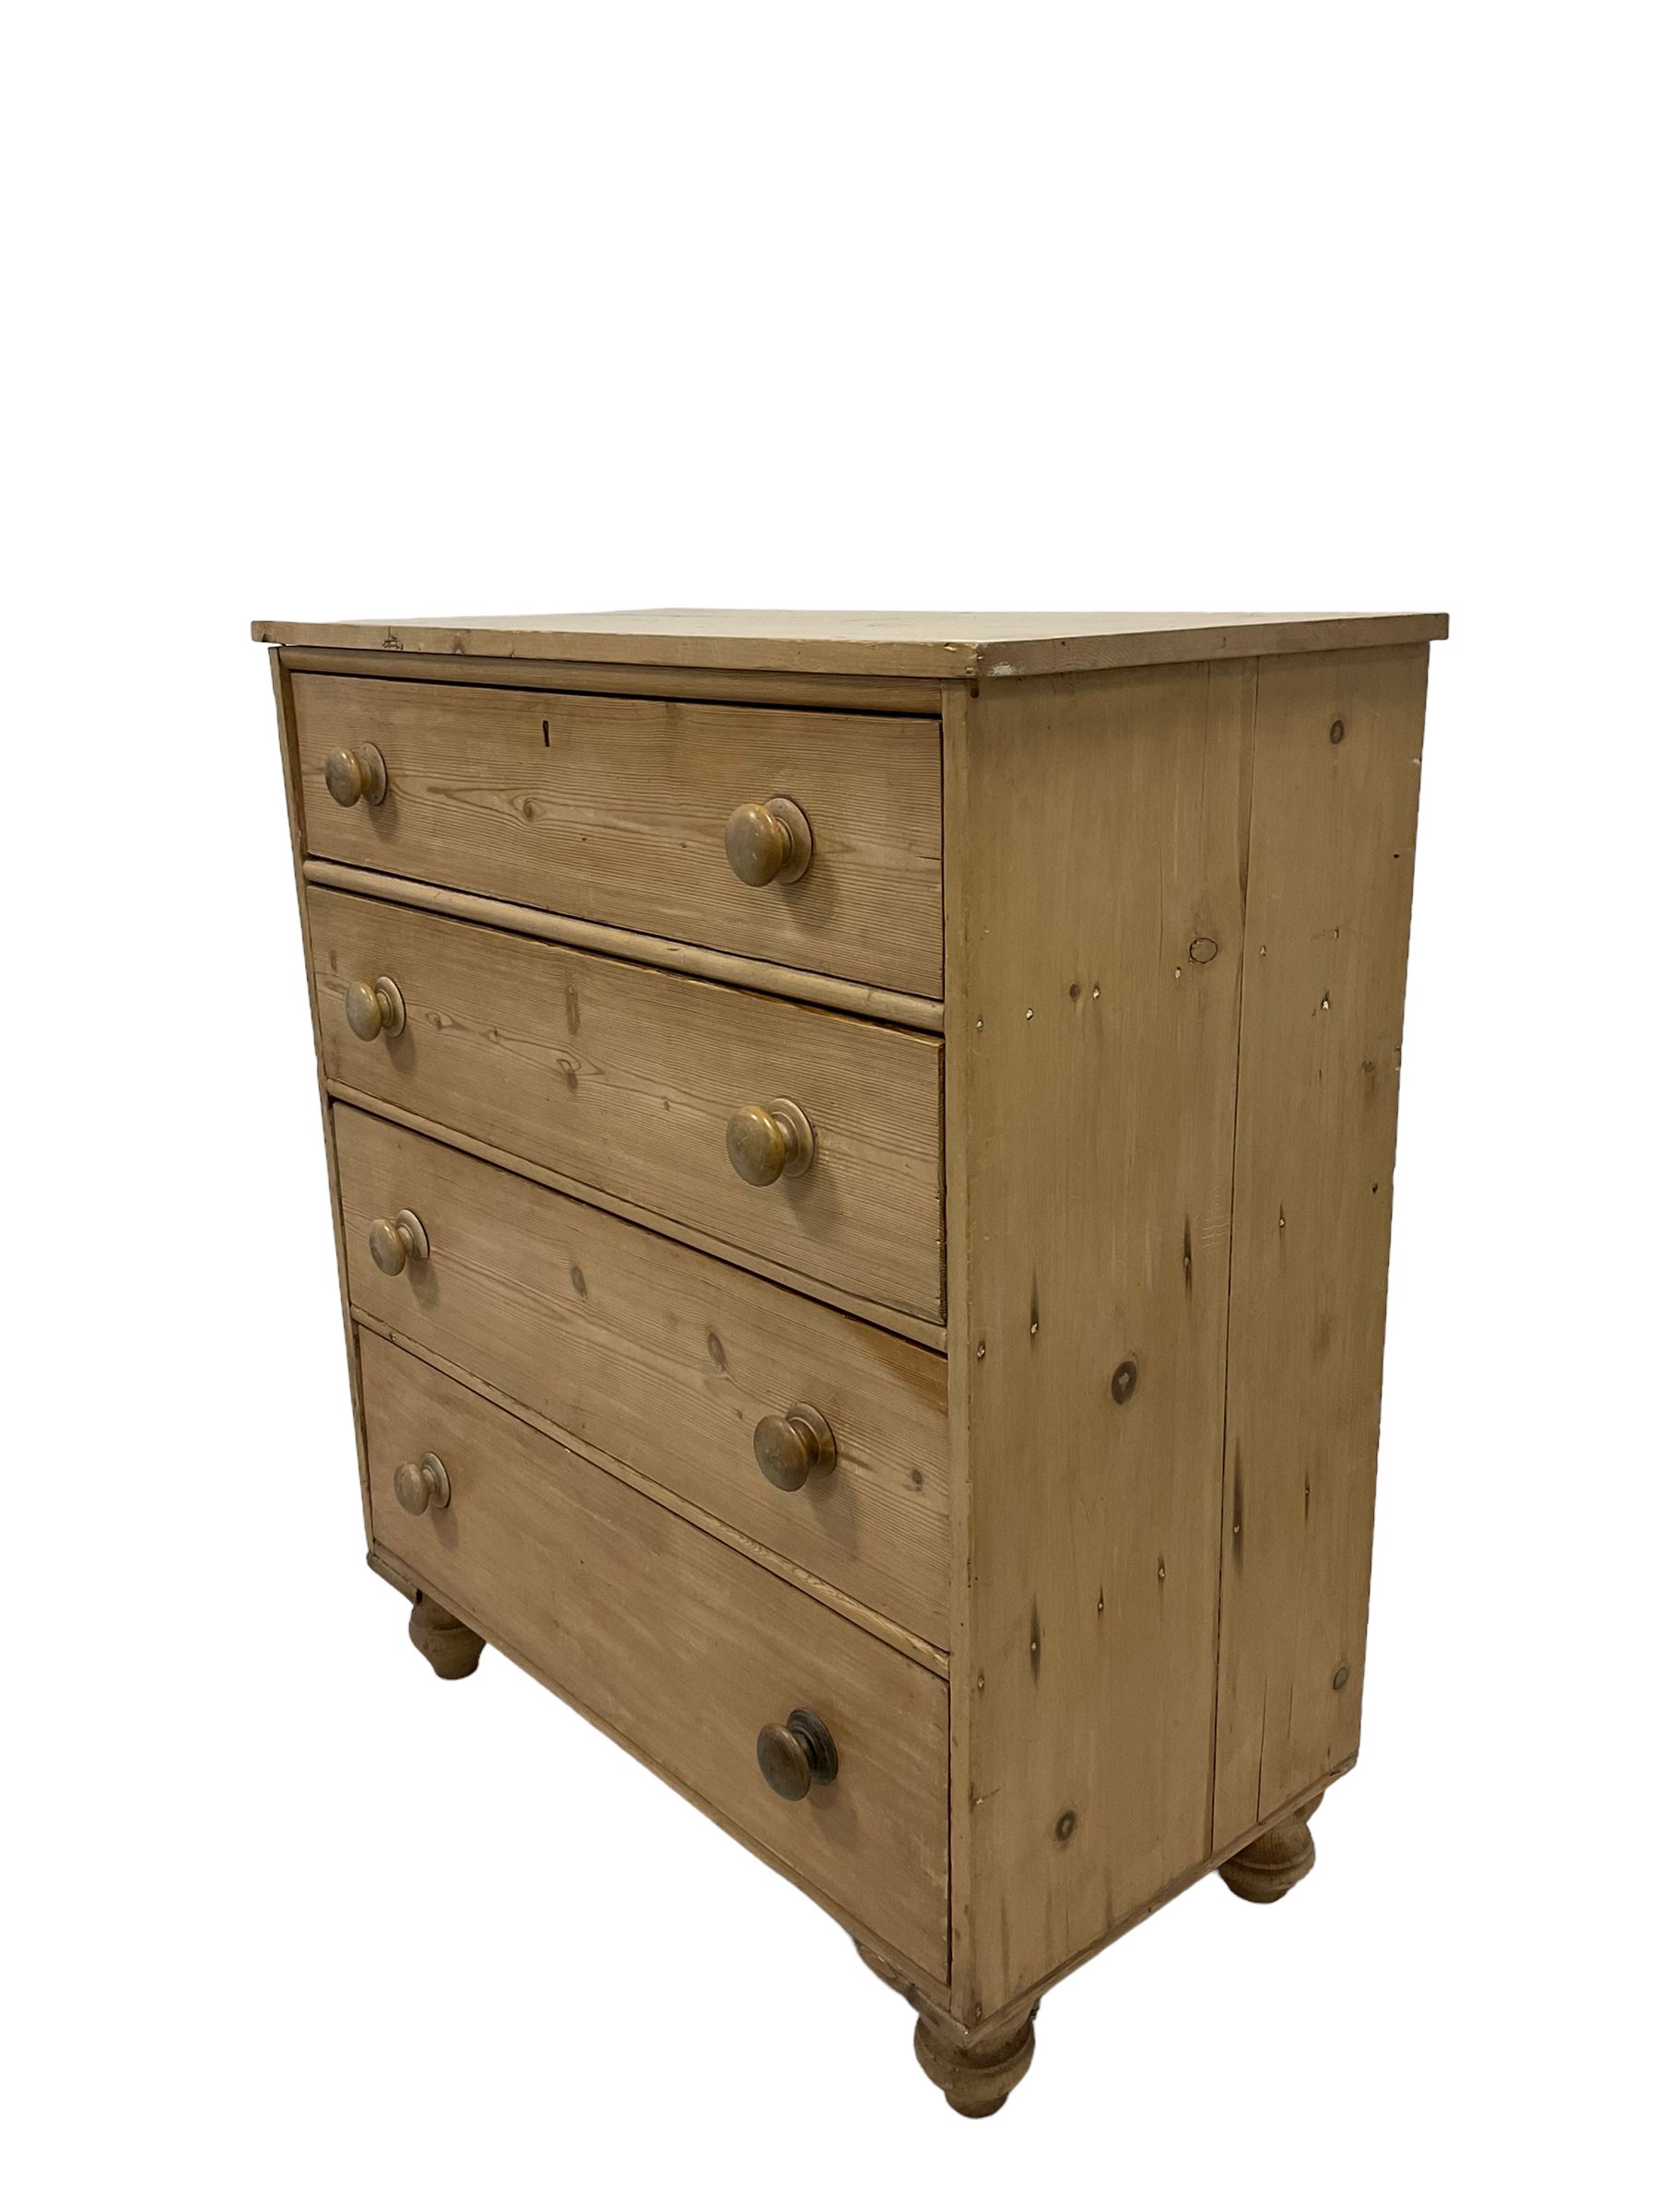 Victorian pine chest of drawers - Image 2 of 4